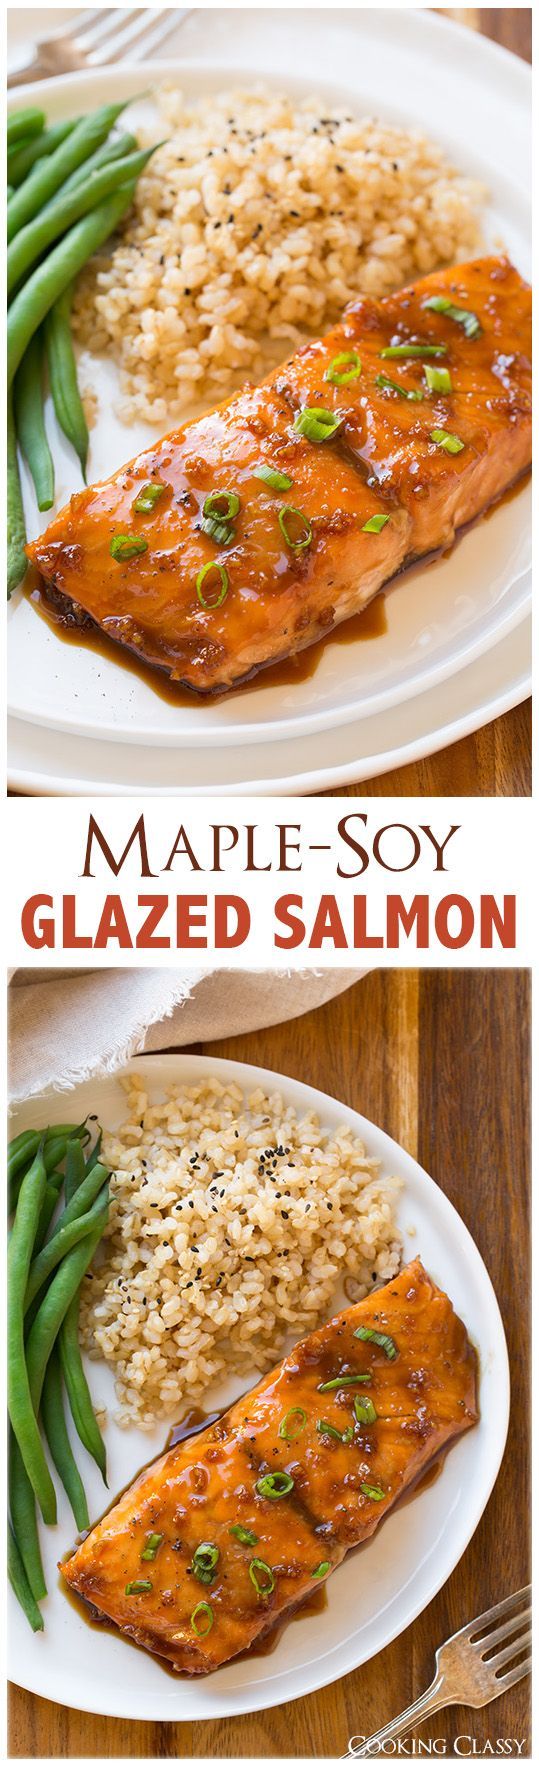 Maple-Soy Glazed Salmon – only FOUR ingredients and it tastes seriously DELICIOUS!!